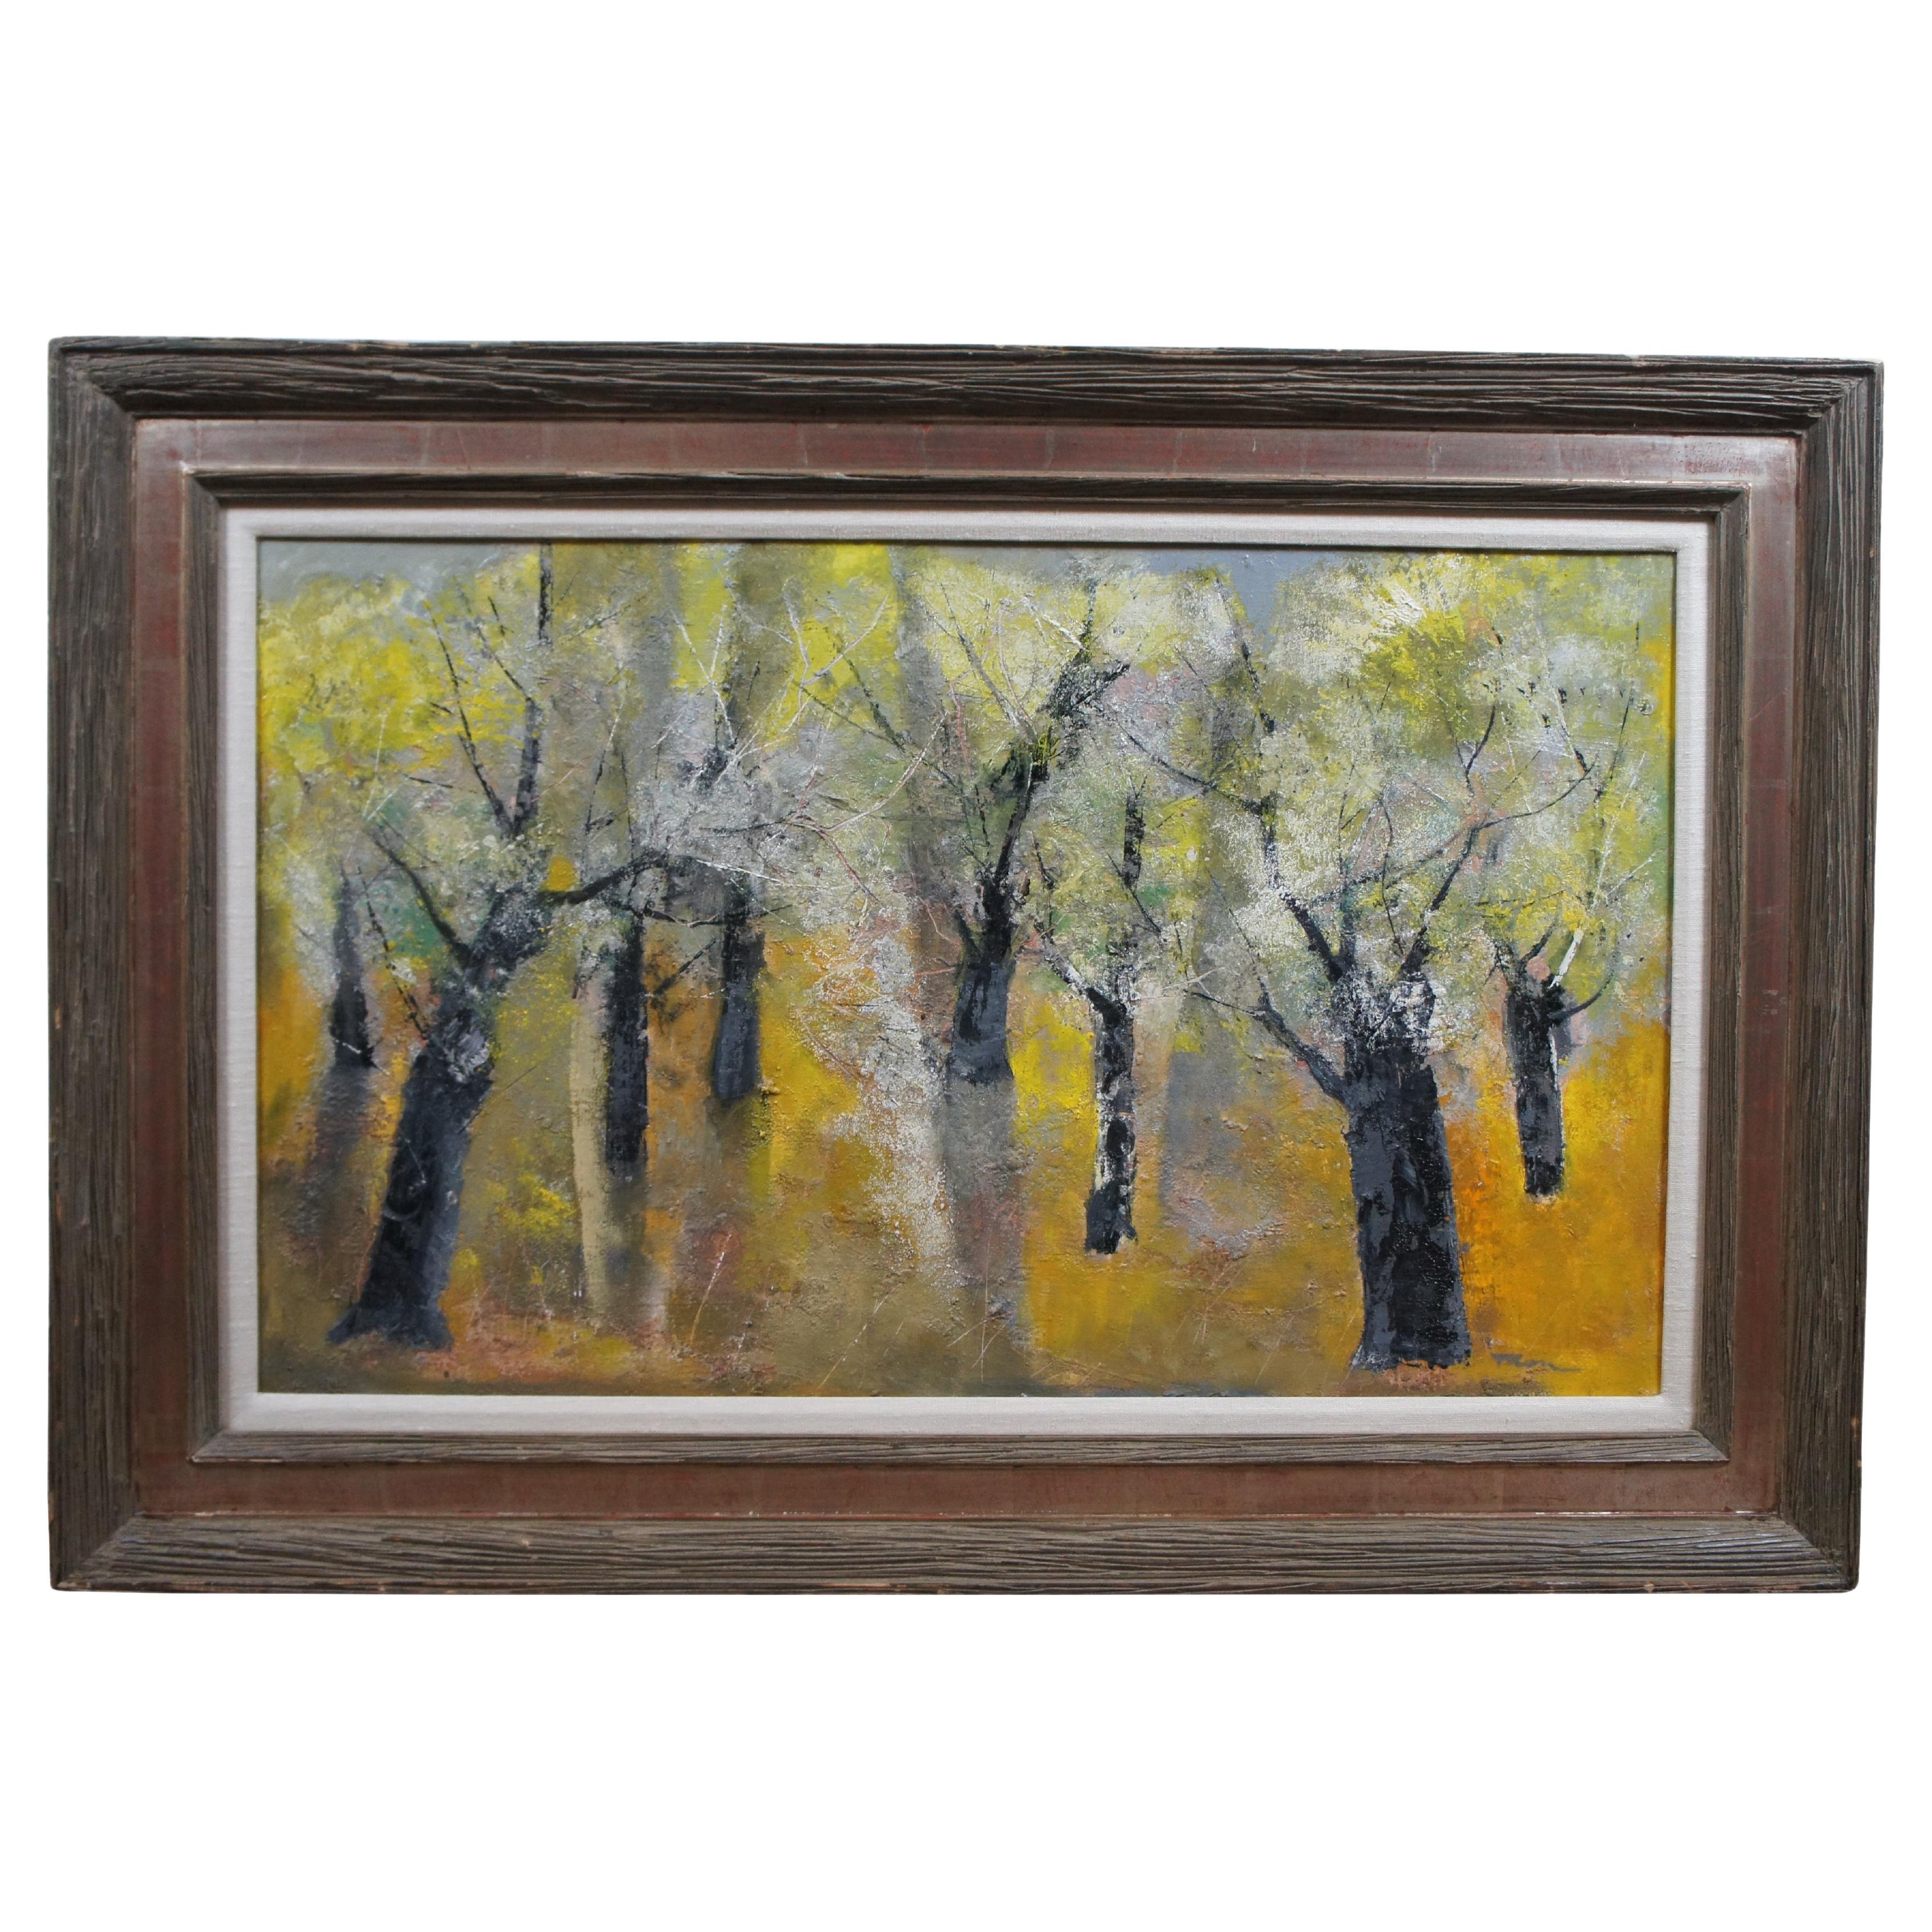 William Thon Olive Trees Abstract Expressionist Oil on Board Landscape Painting For Sale